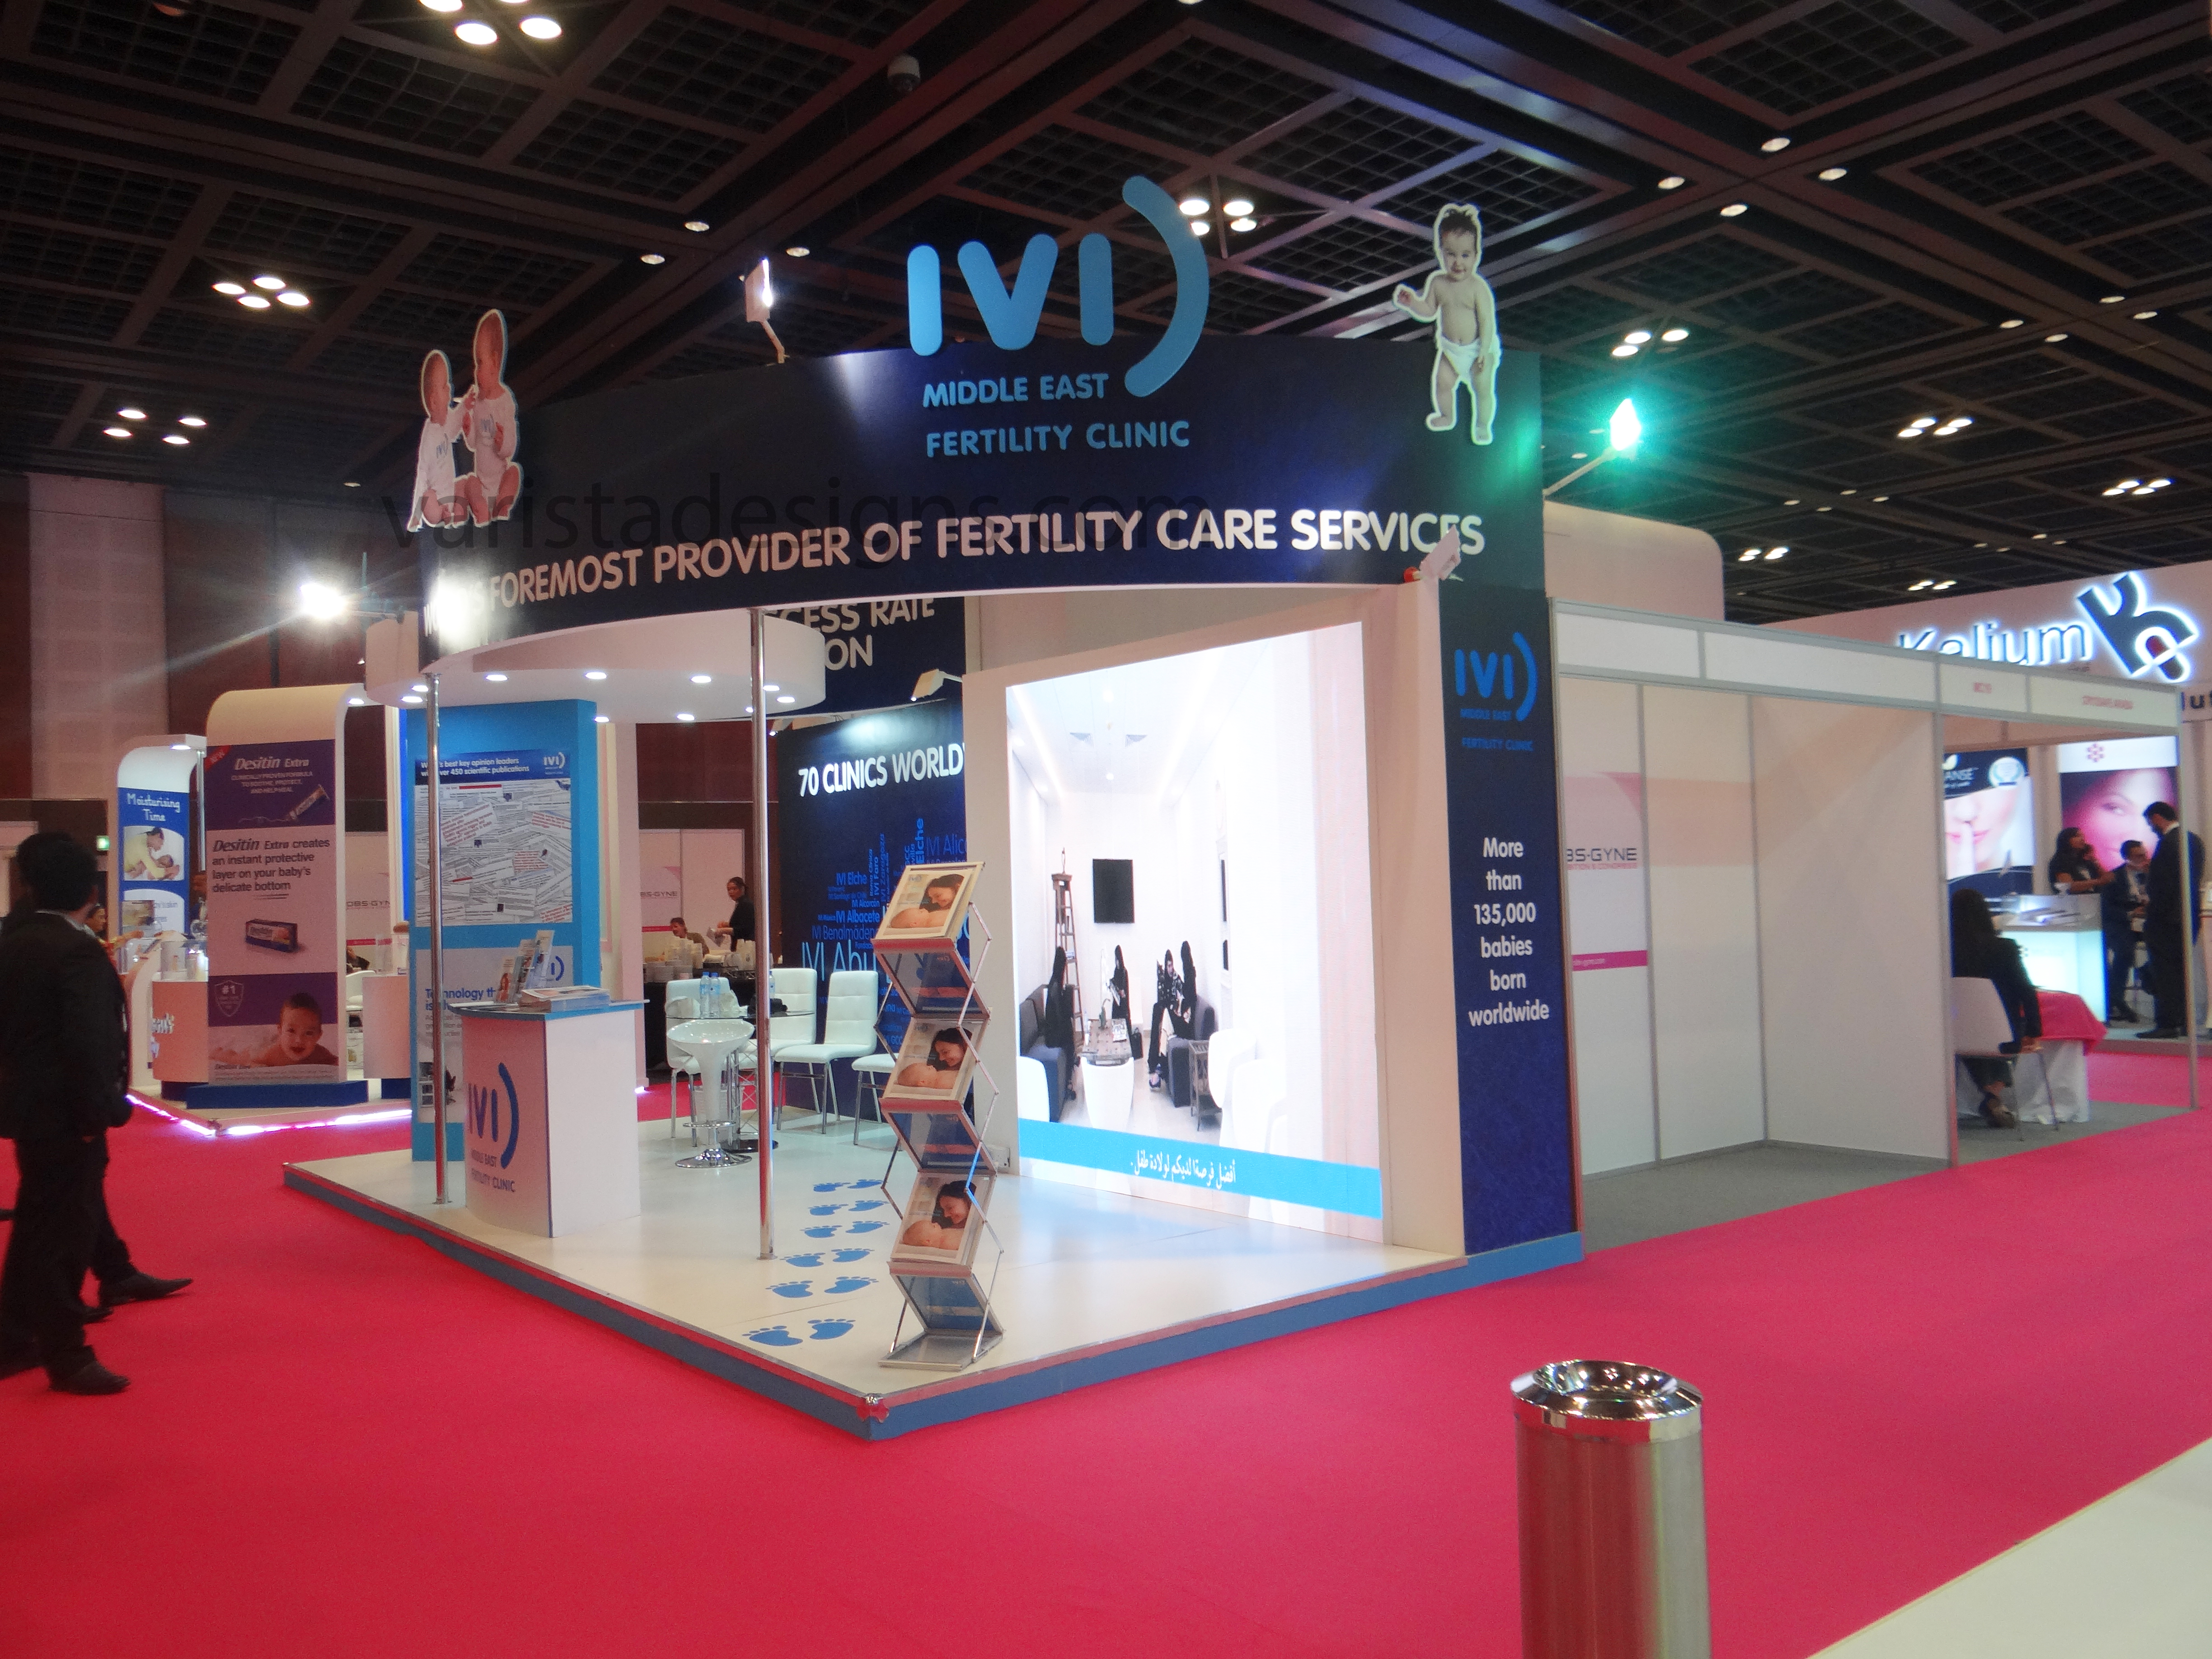  IVI middle east fertility clinic Exhibition Stand Designs